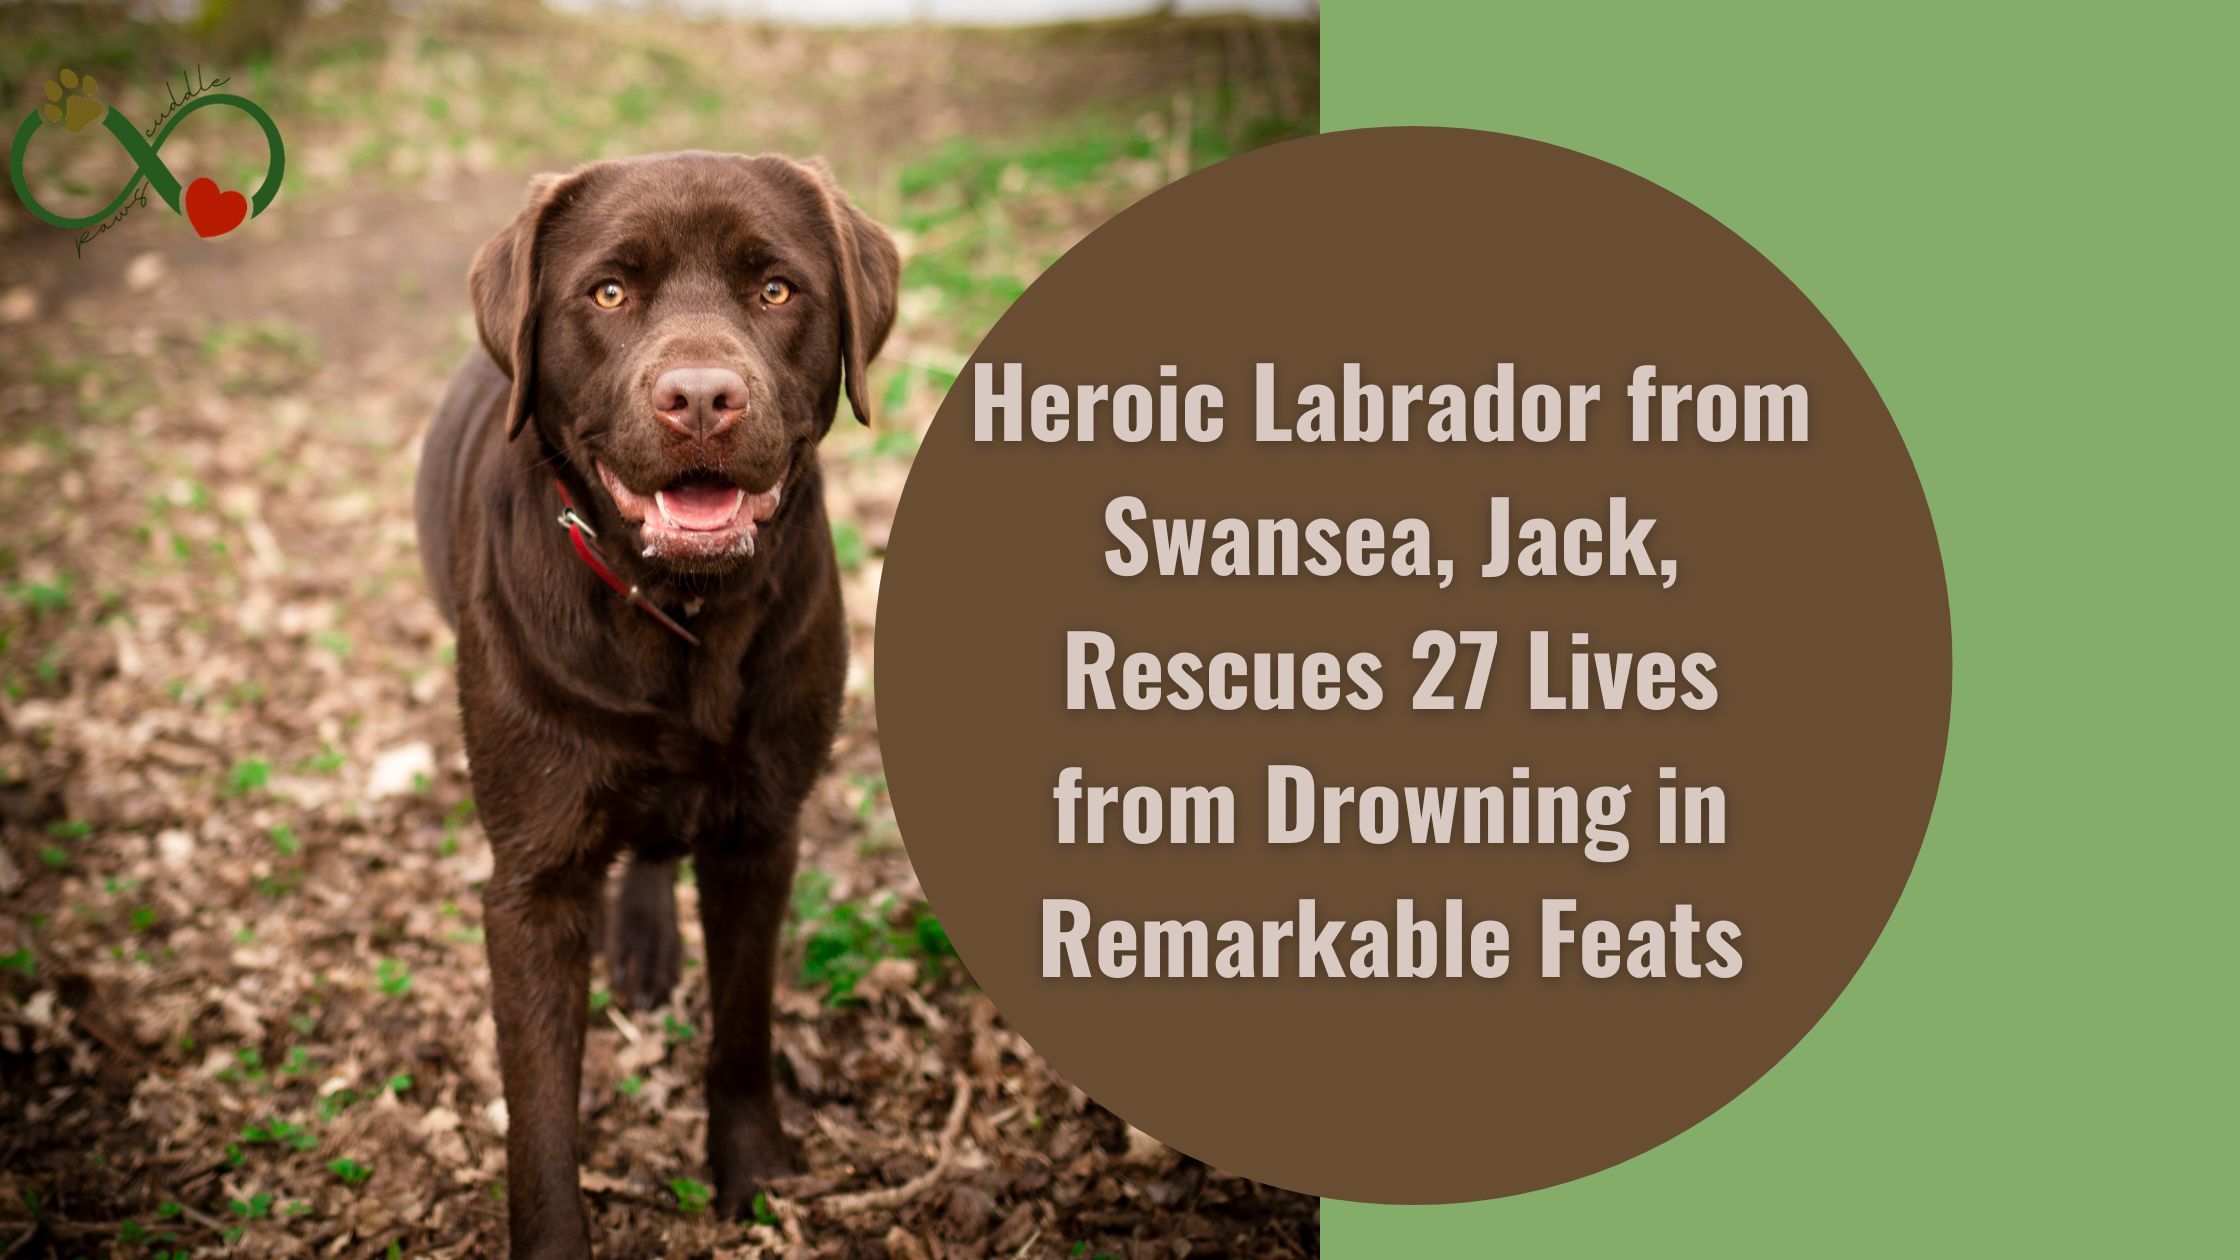 Heroic Labrador from Swansea, Jack, Rescues 27 Lives from Drowning in Remarkable Feats